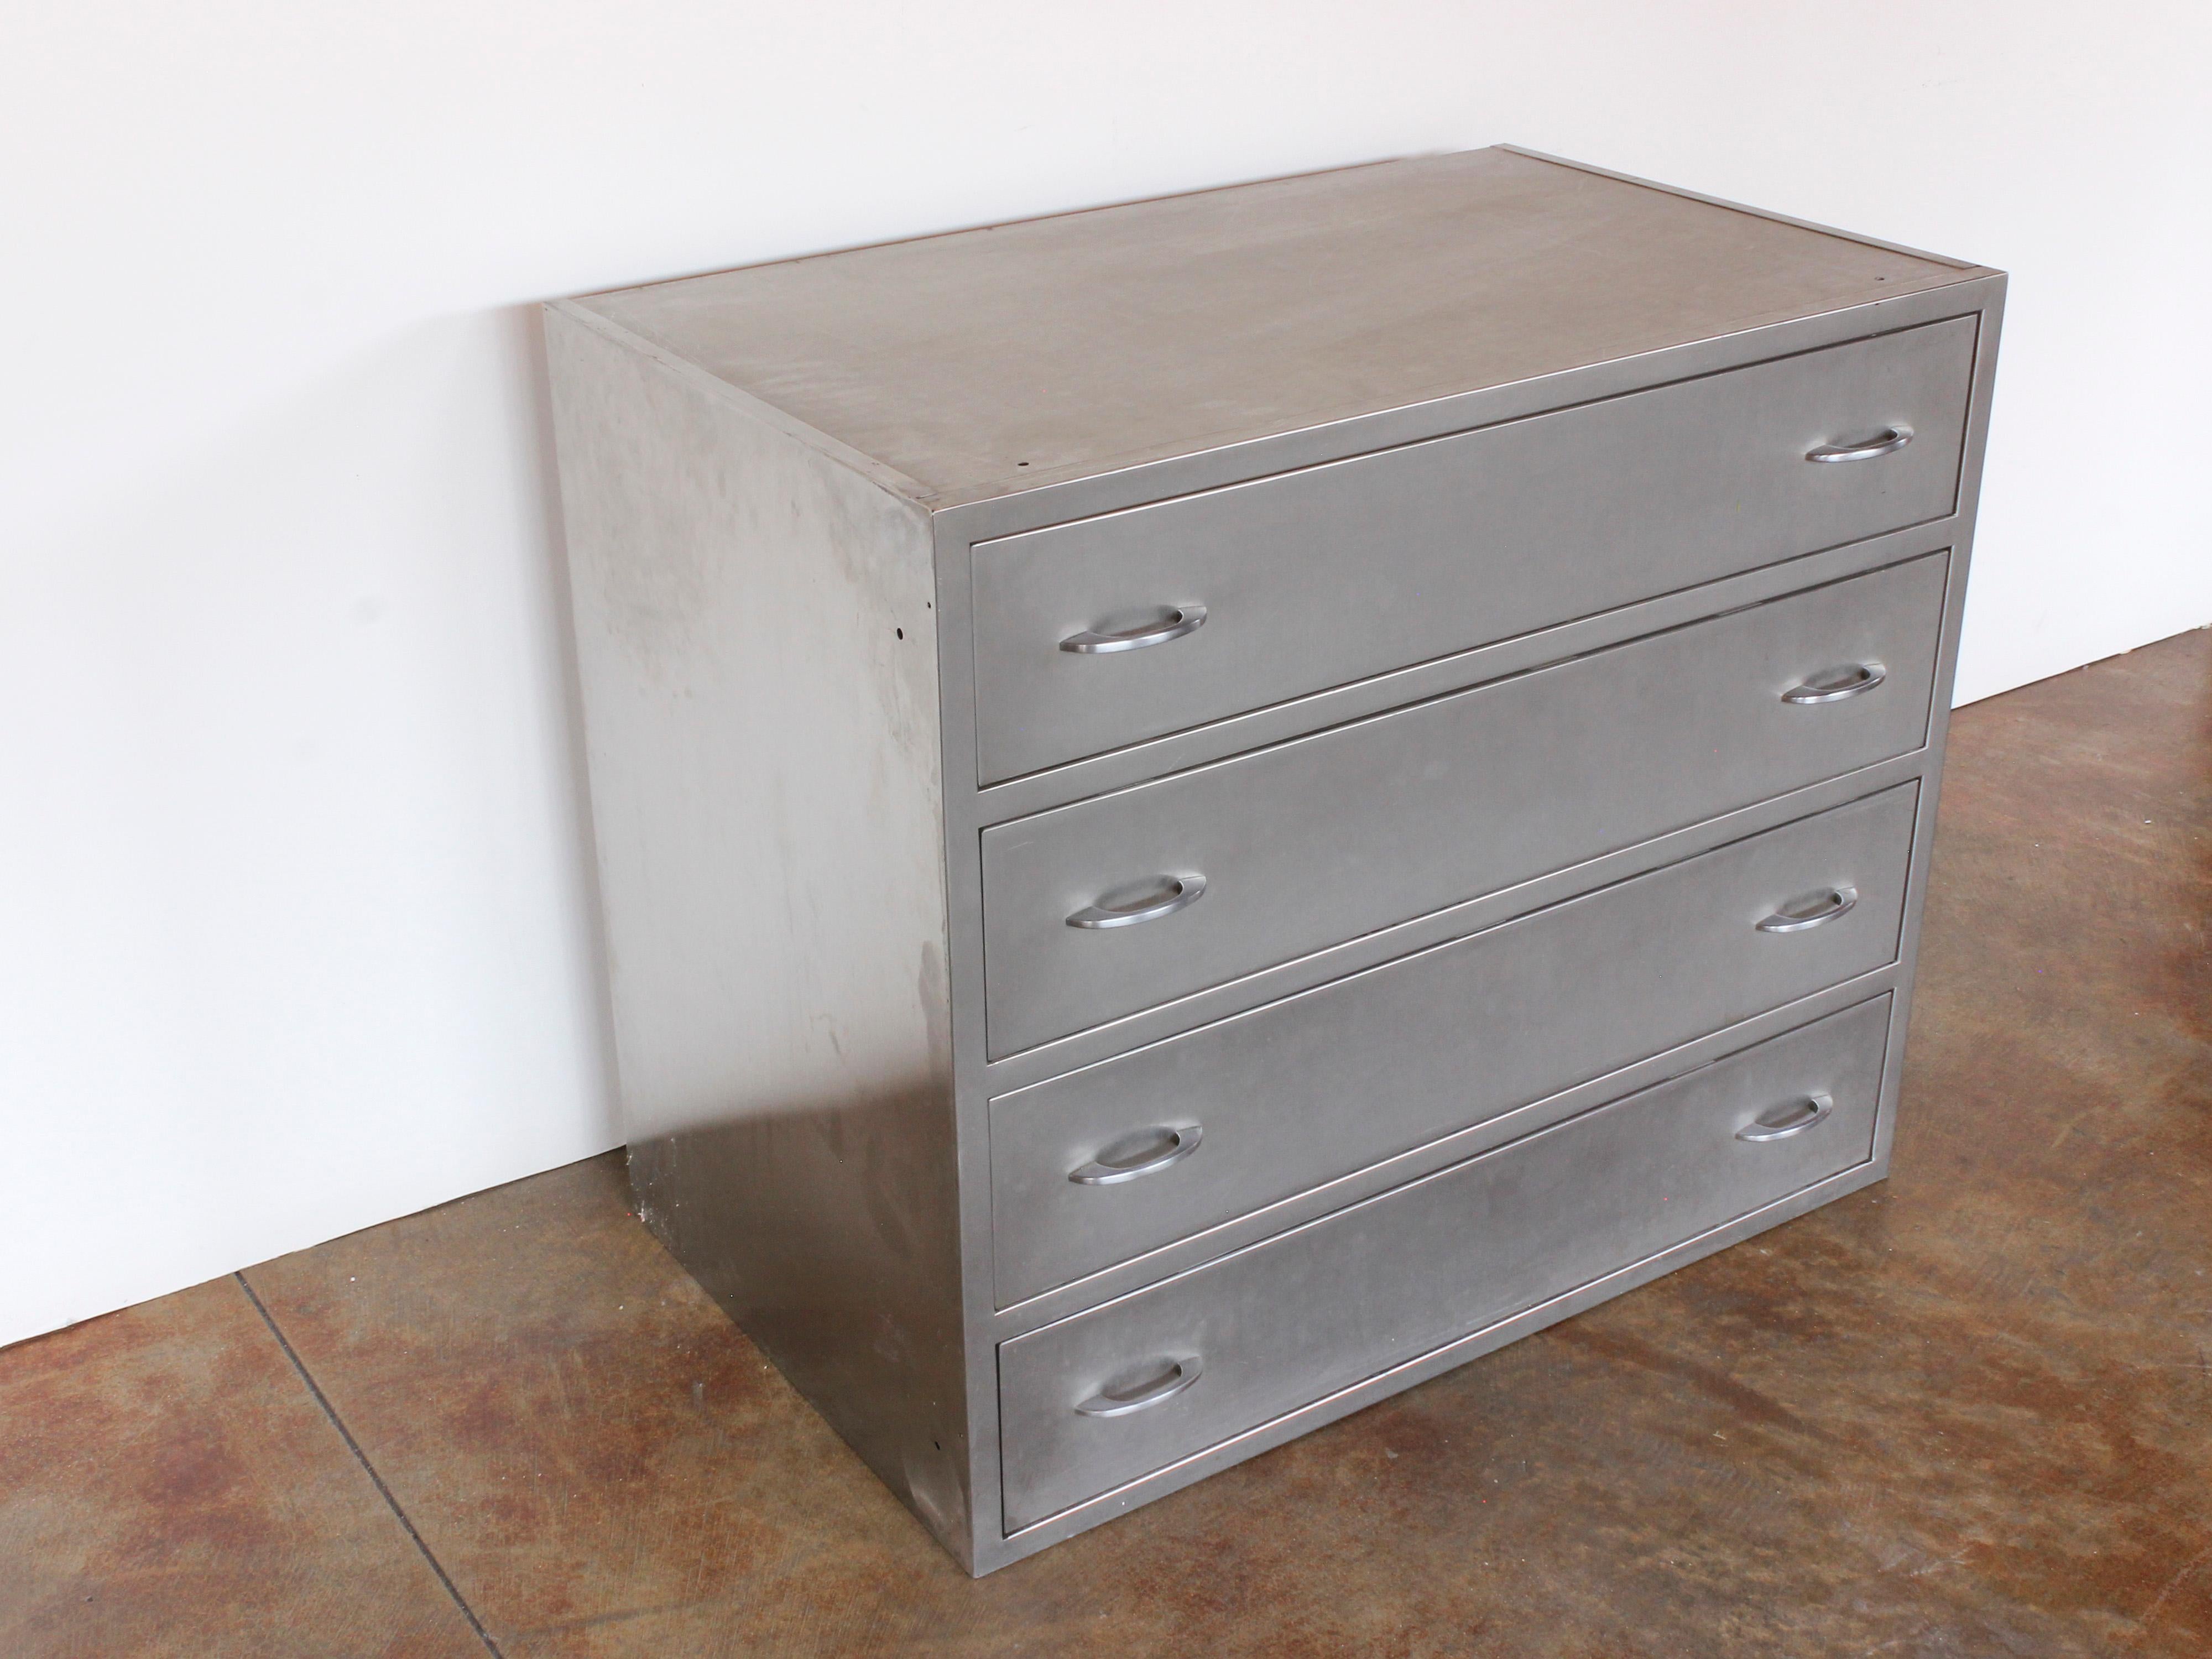 American Industrial Stainless Steel Chest With 4 Drawers, C. 1940s For Sale 2